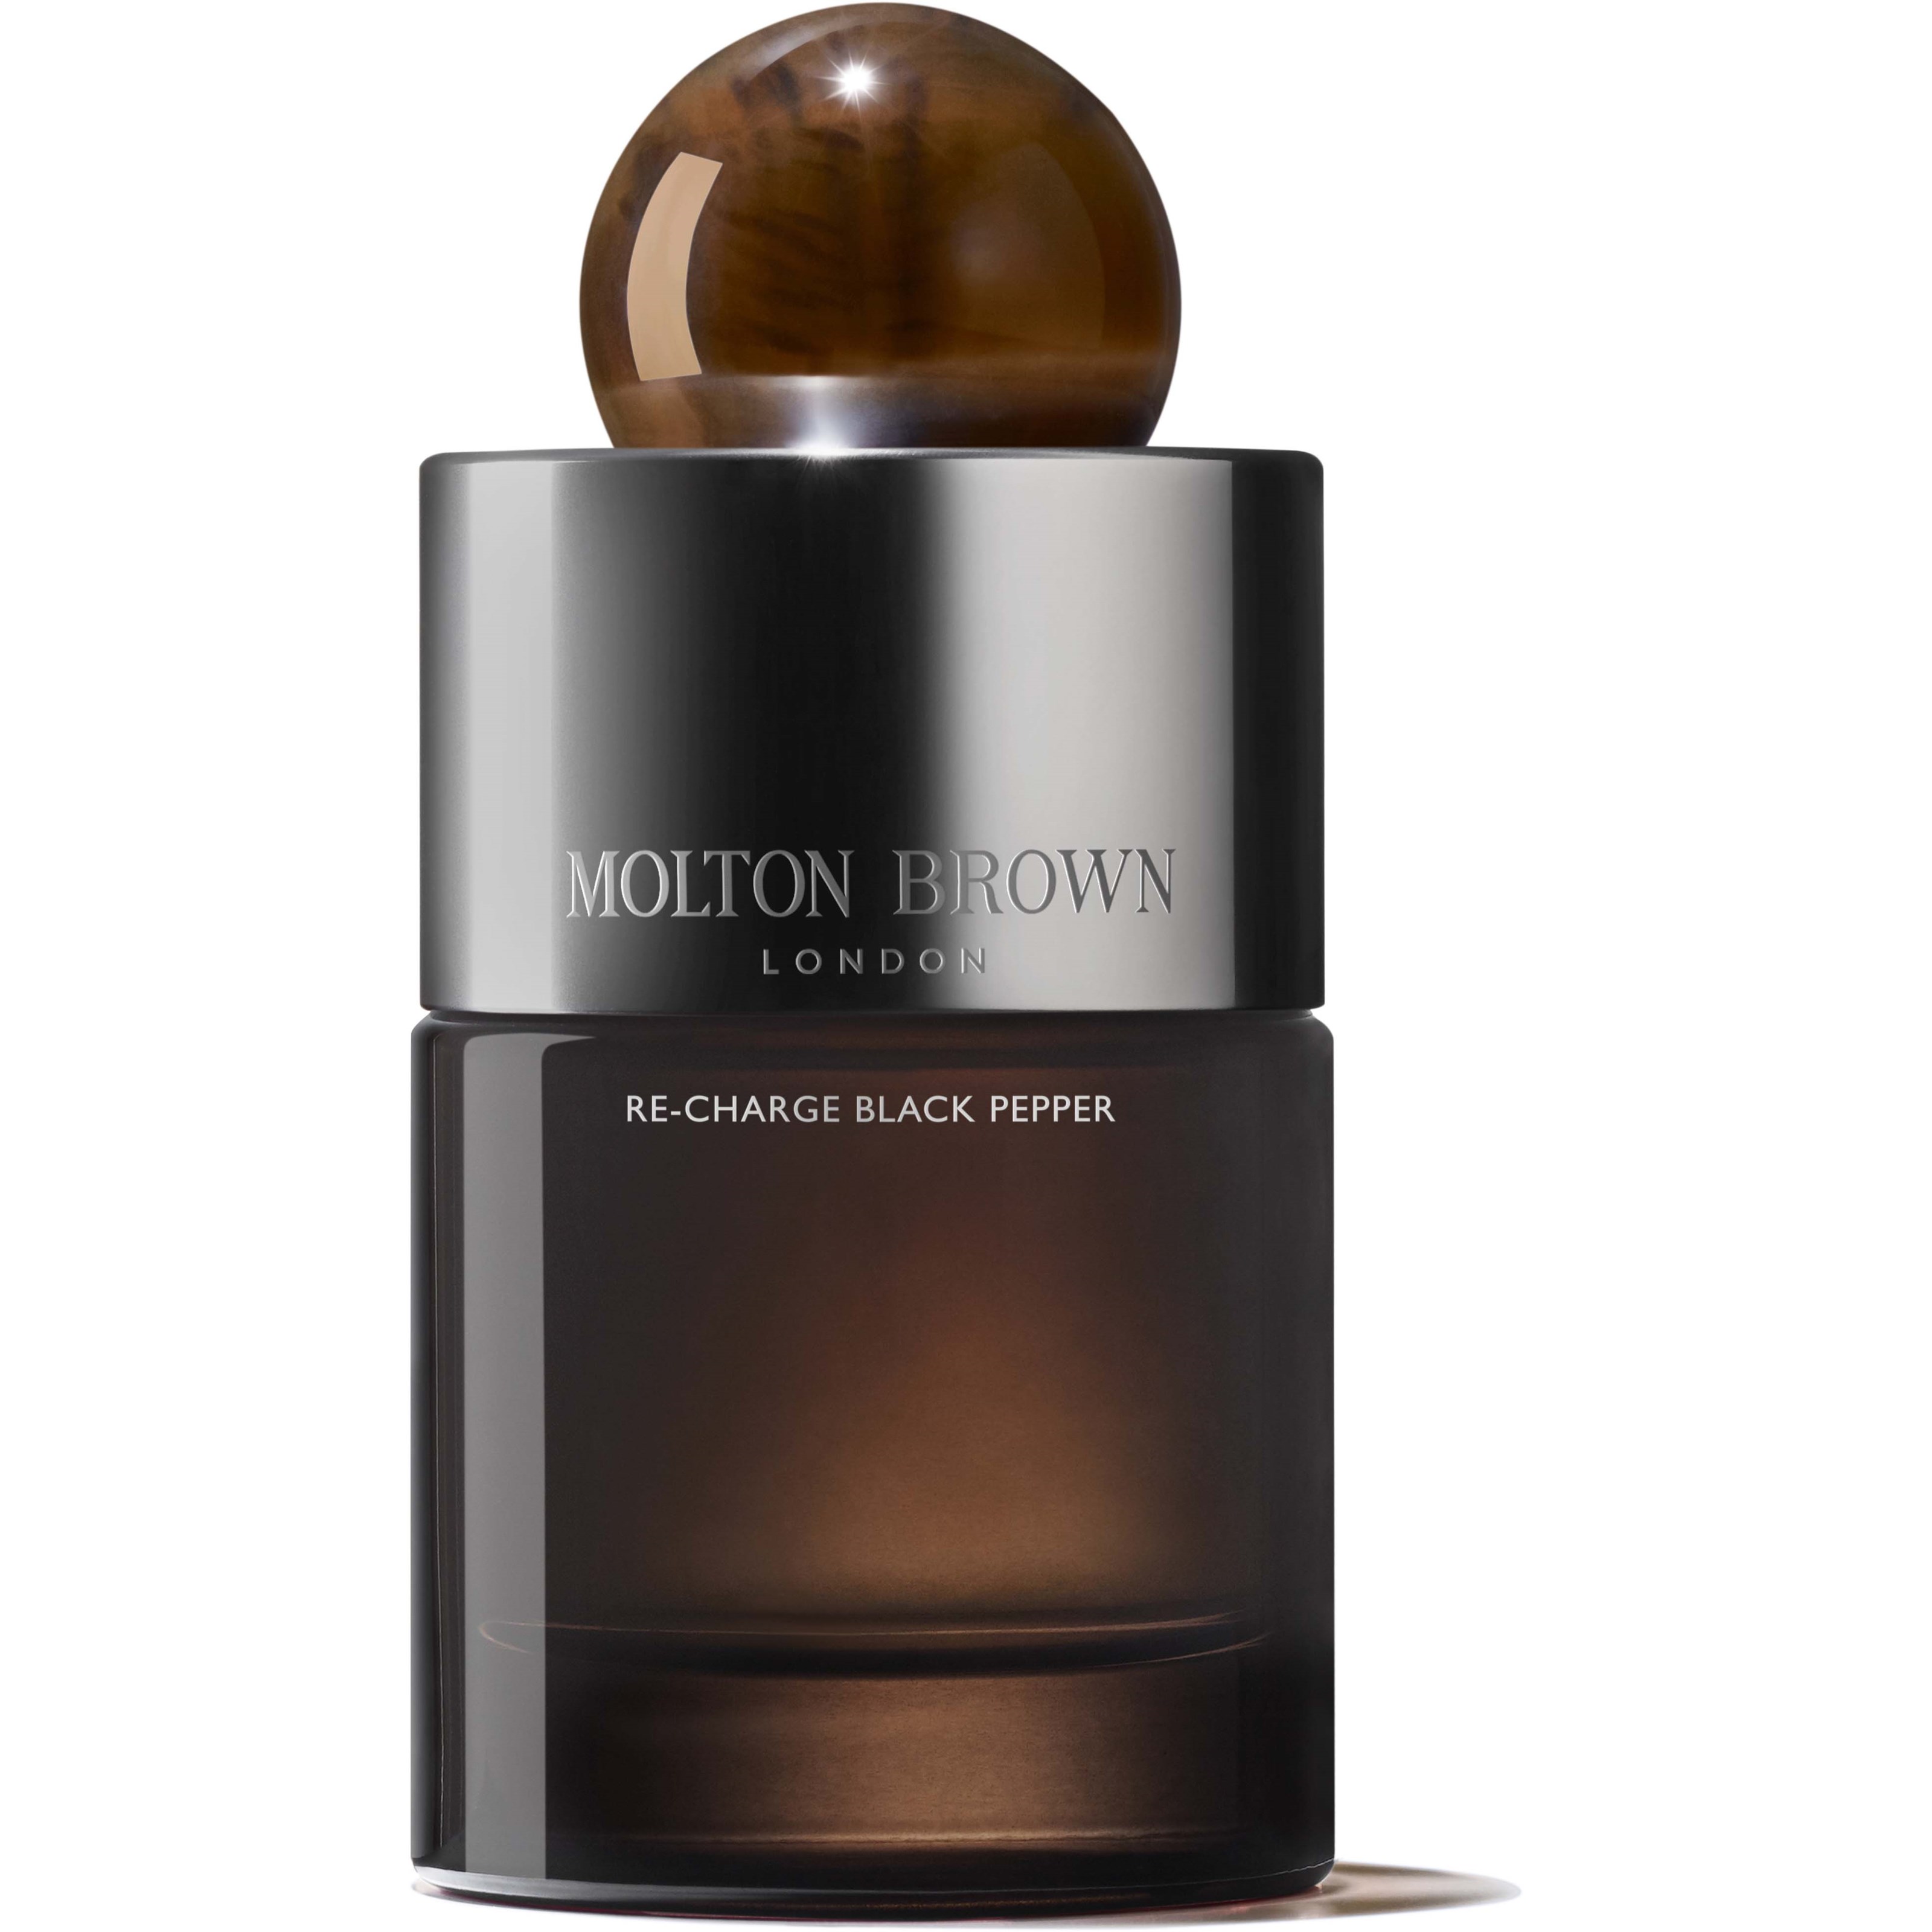 Molton Brown Re-Charge Black Pepper EdP, 100 ml